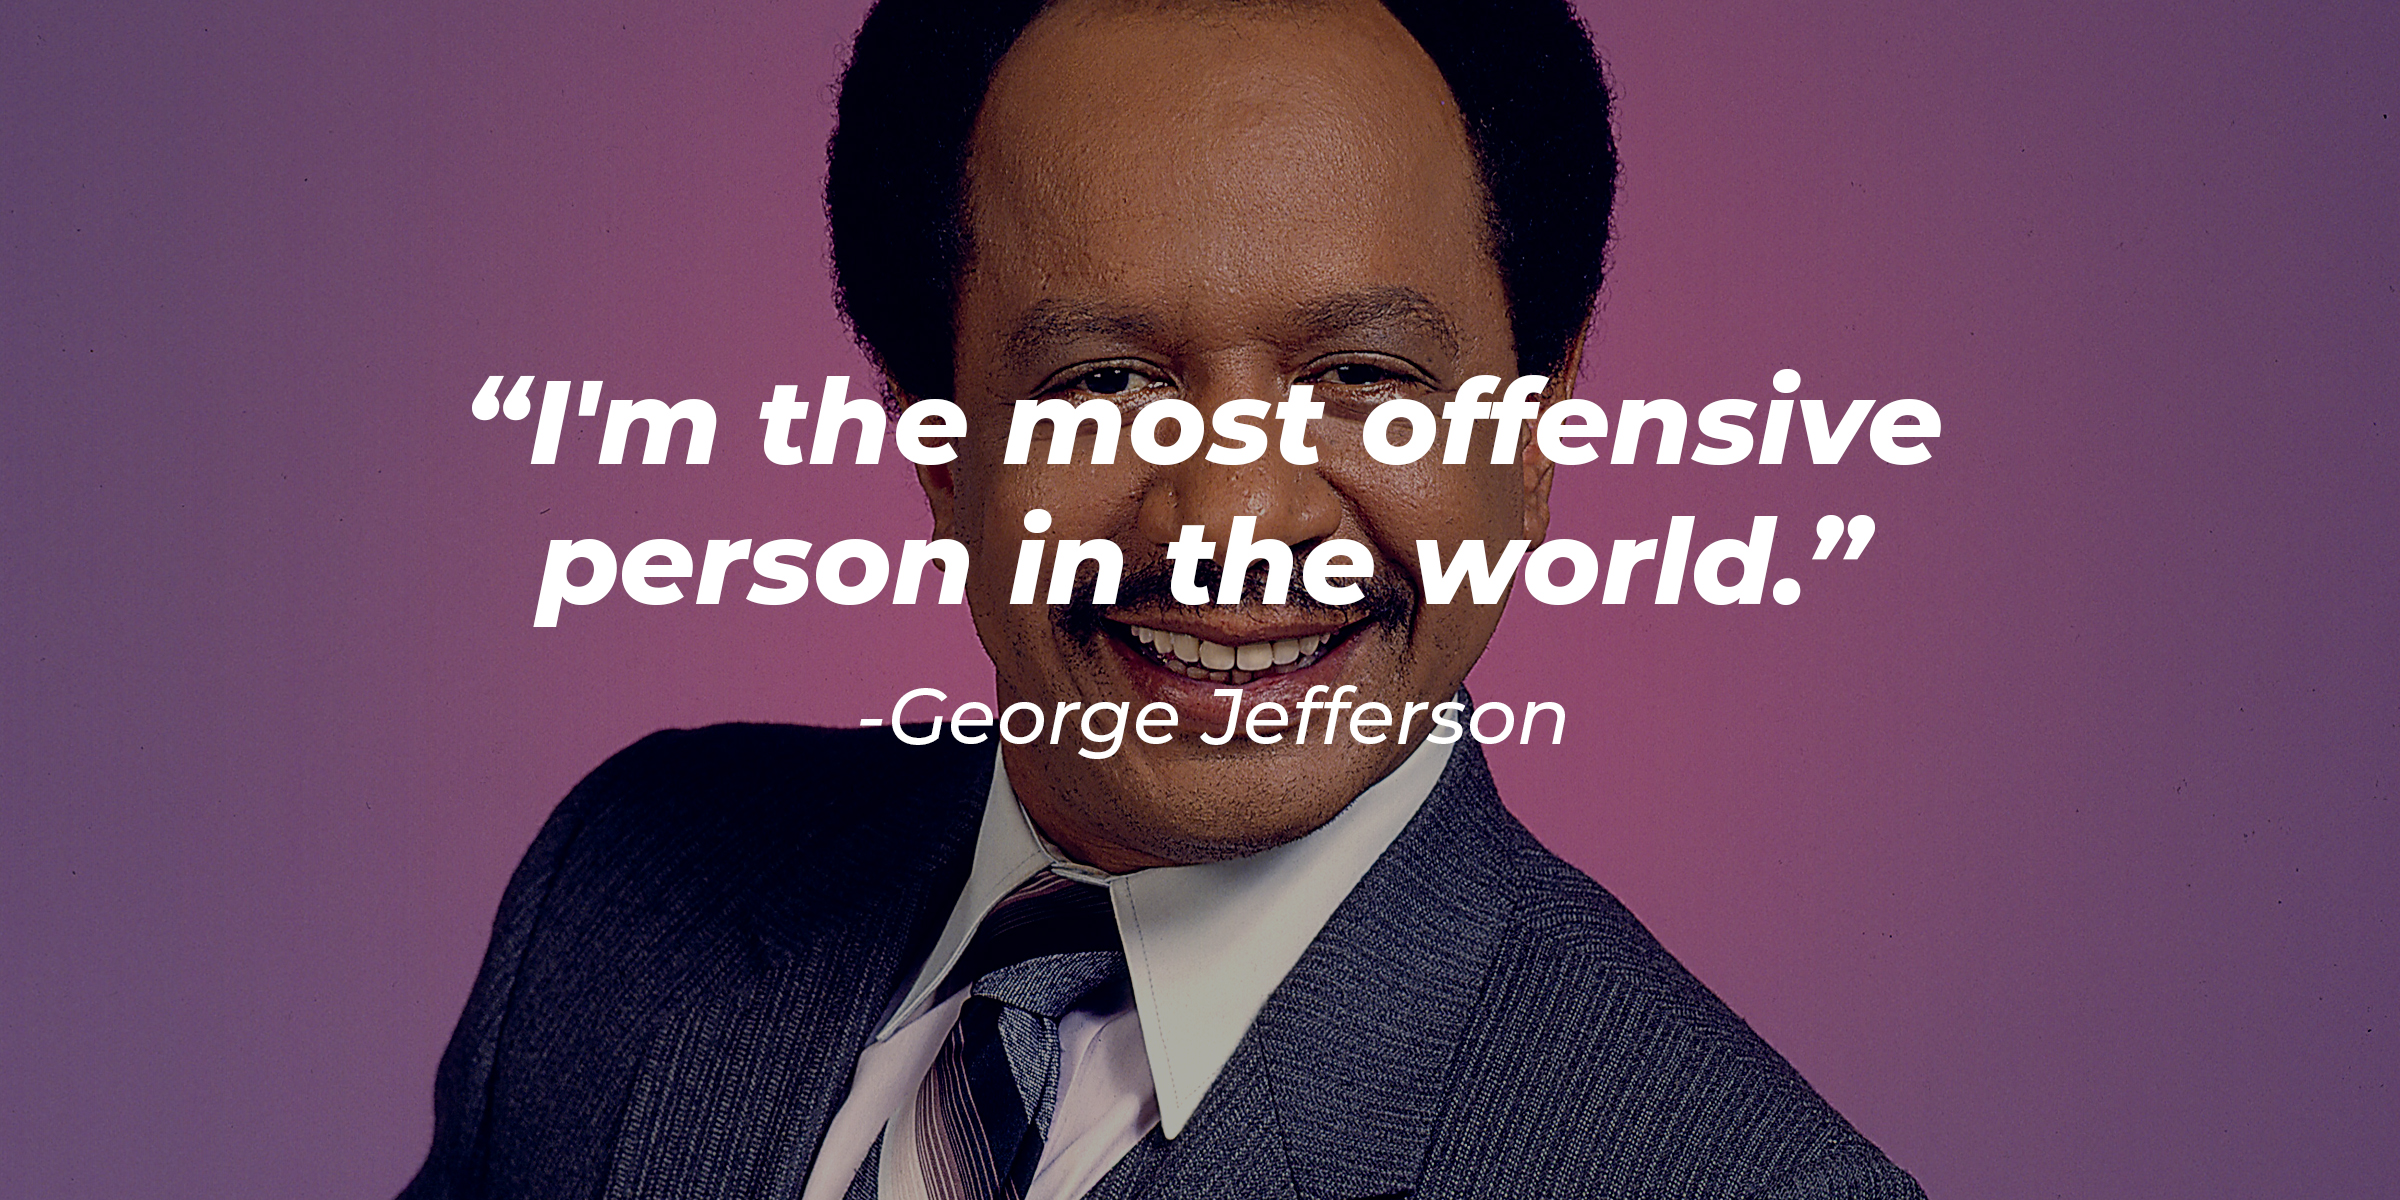 George Jefferson's image with his quote: "I'm the most offensive person in the world." | Source: Getty Images